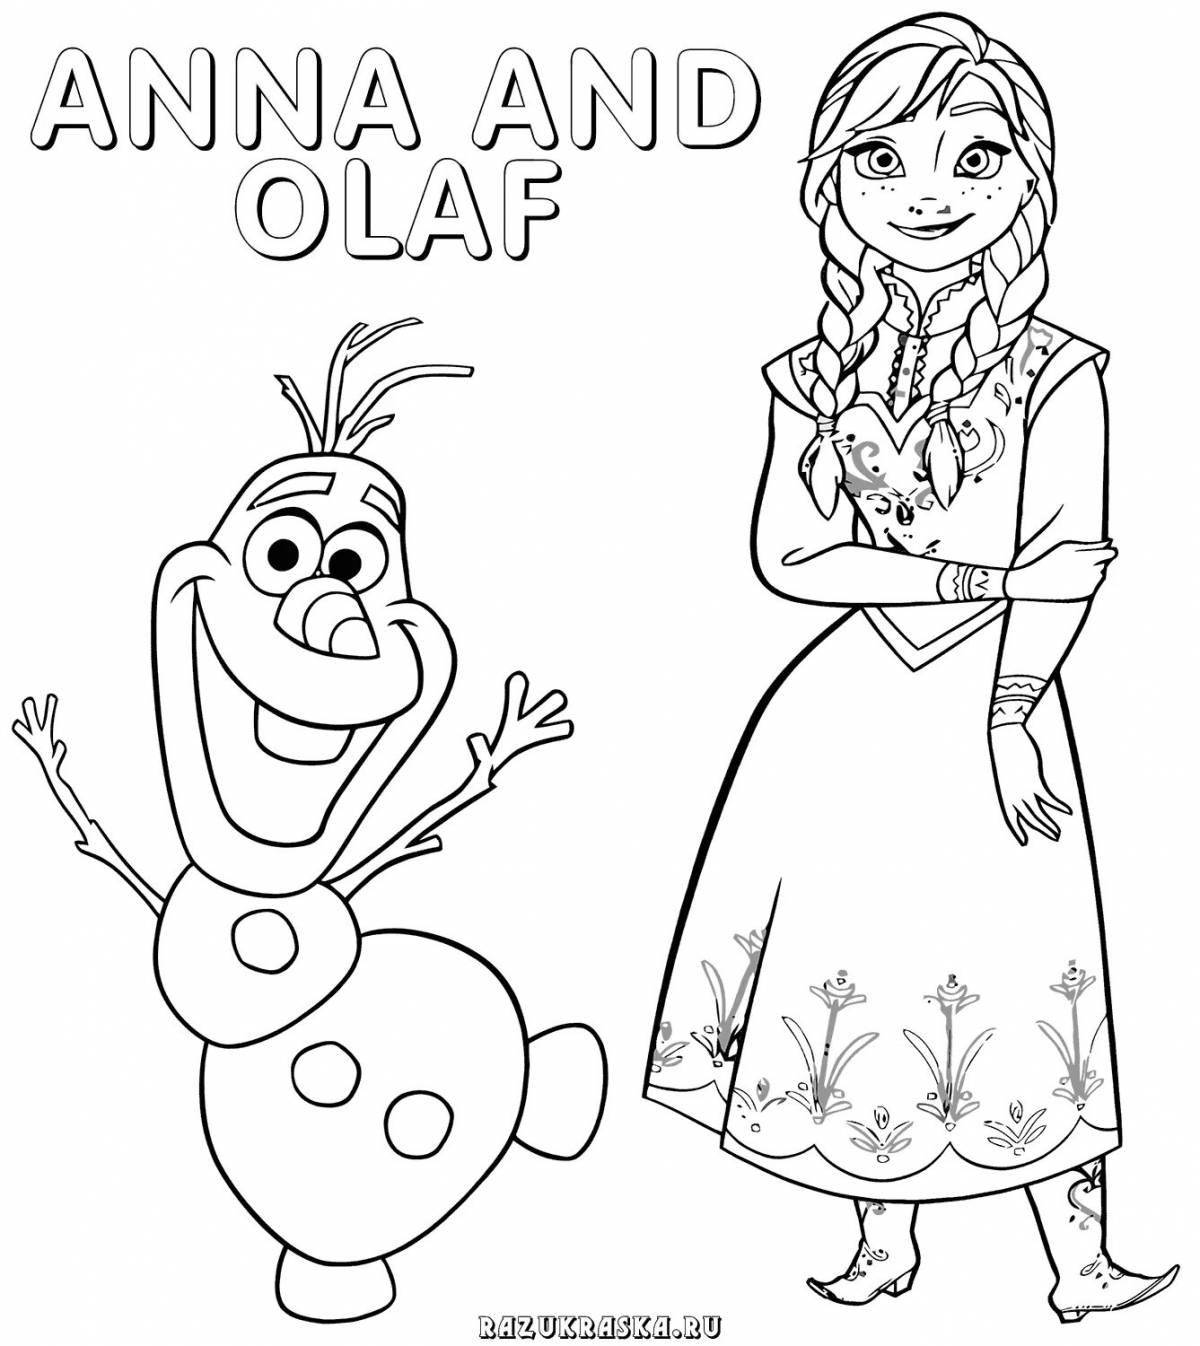 Coloring anna and olaf during games